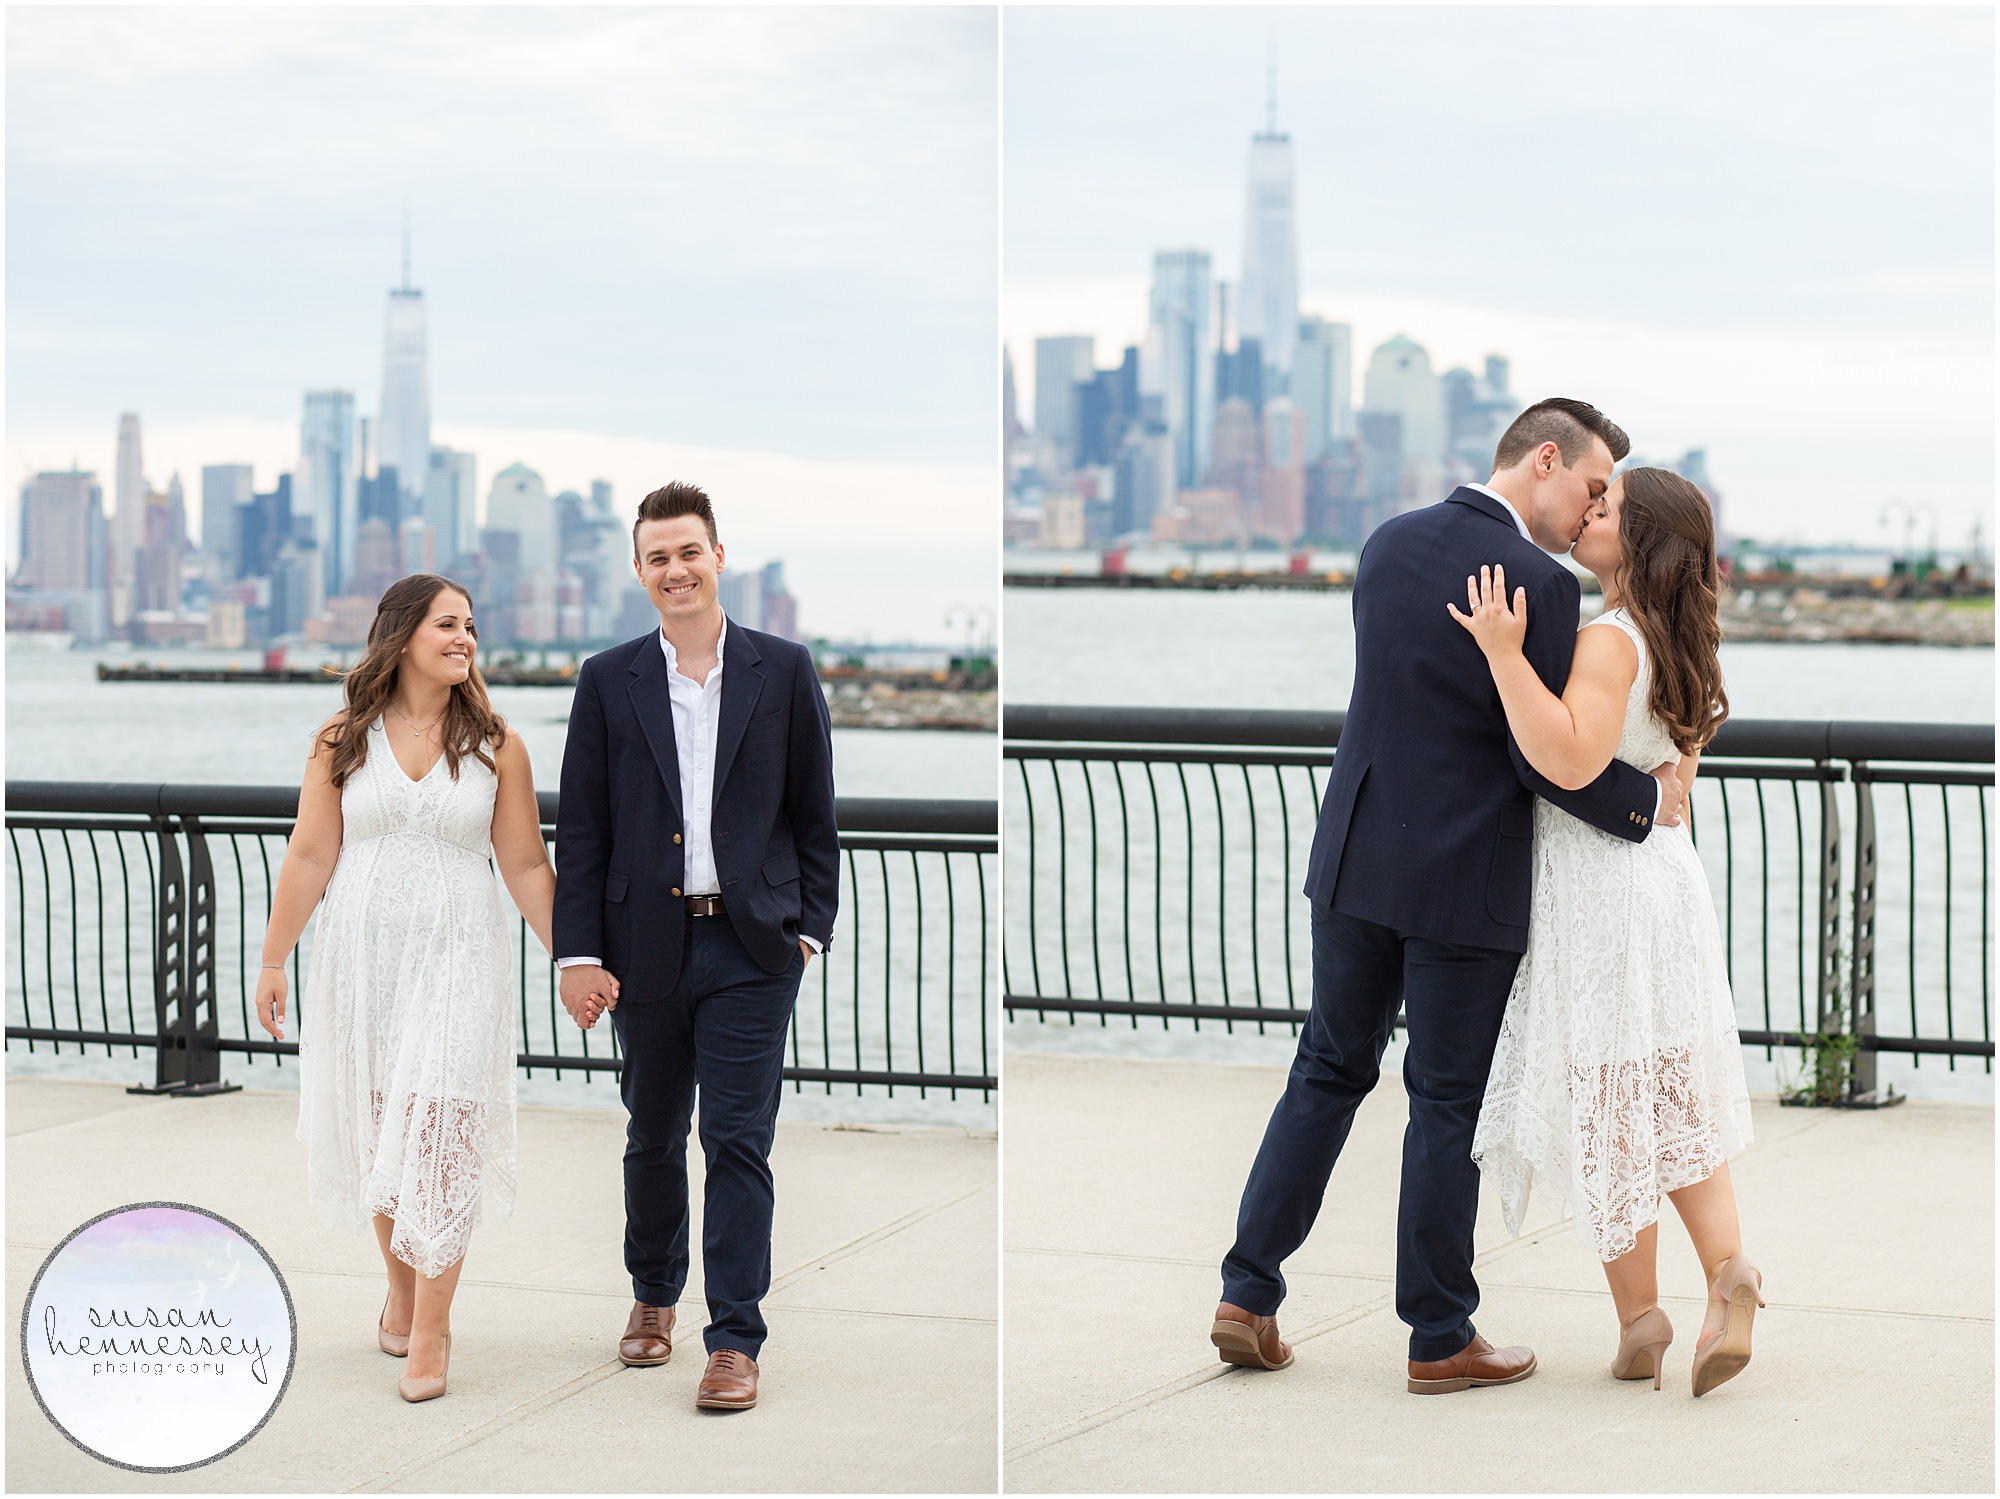 Summer engagement session overlooking NYC skyline.